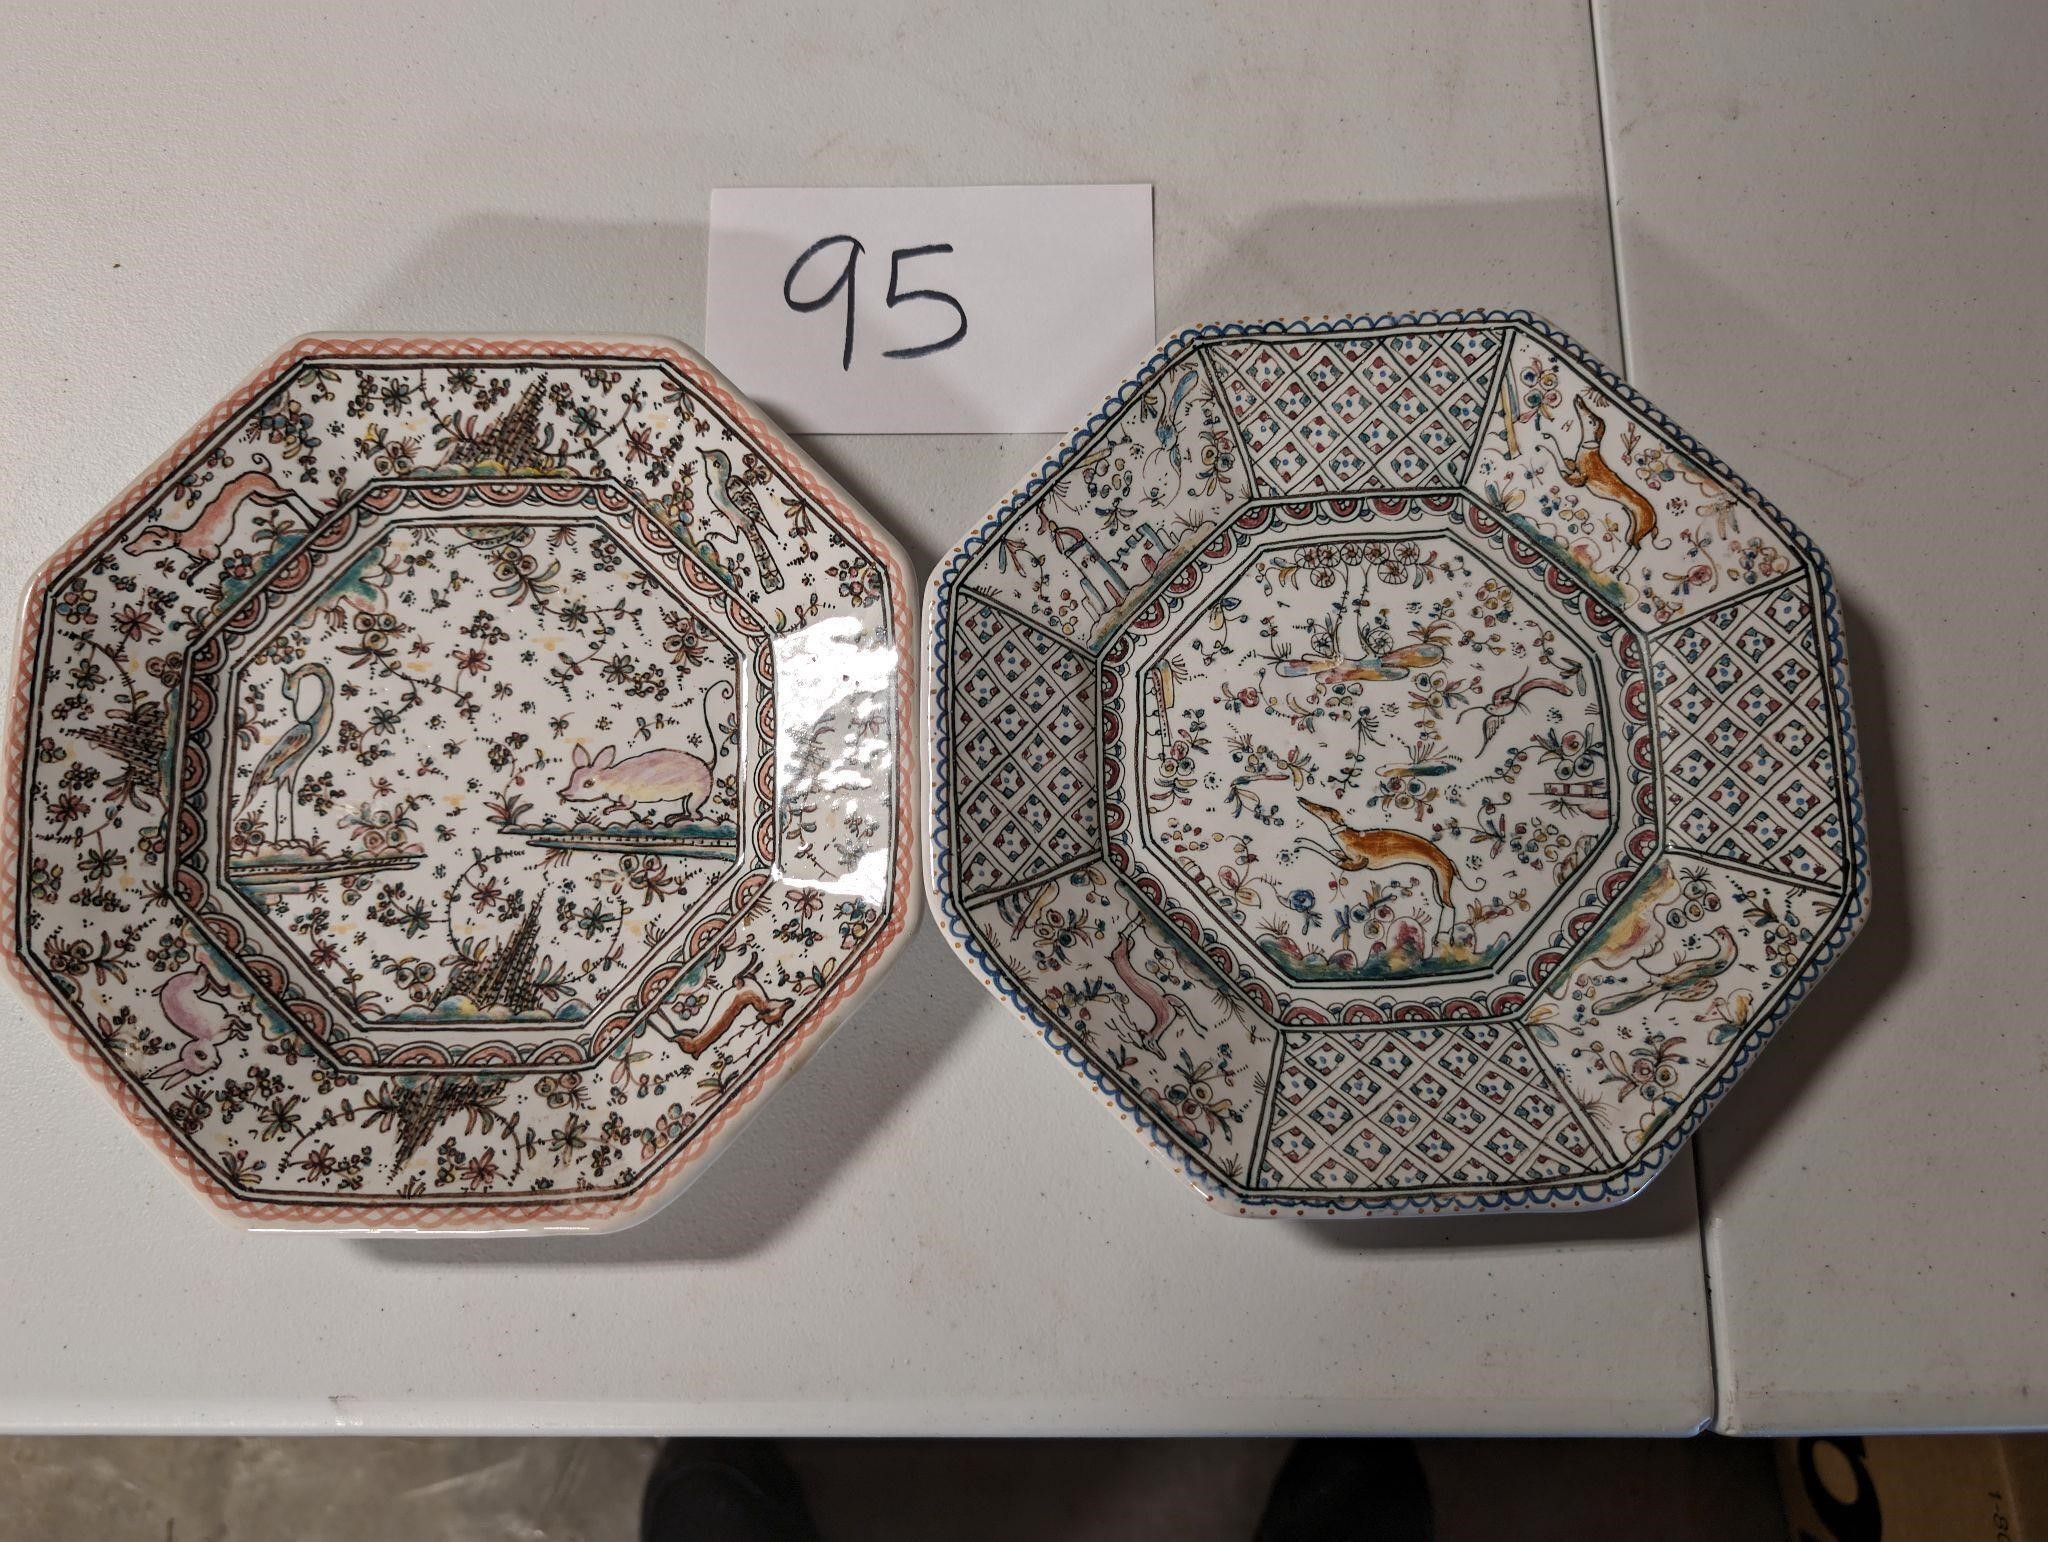 Hand Painted Intricate Plates made in Portugal